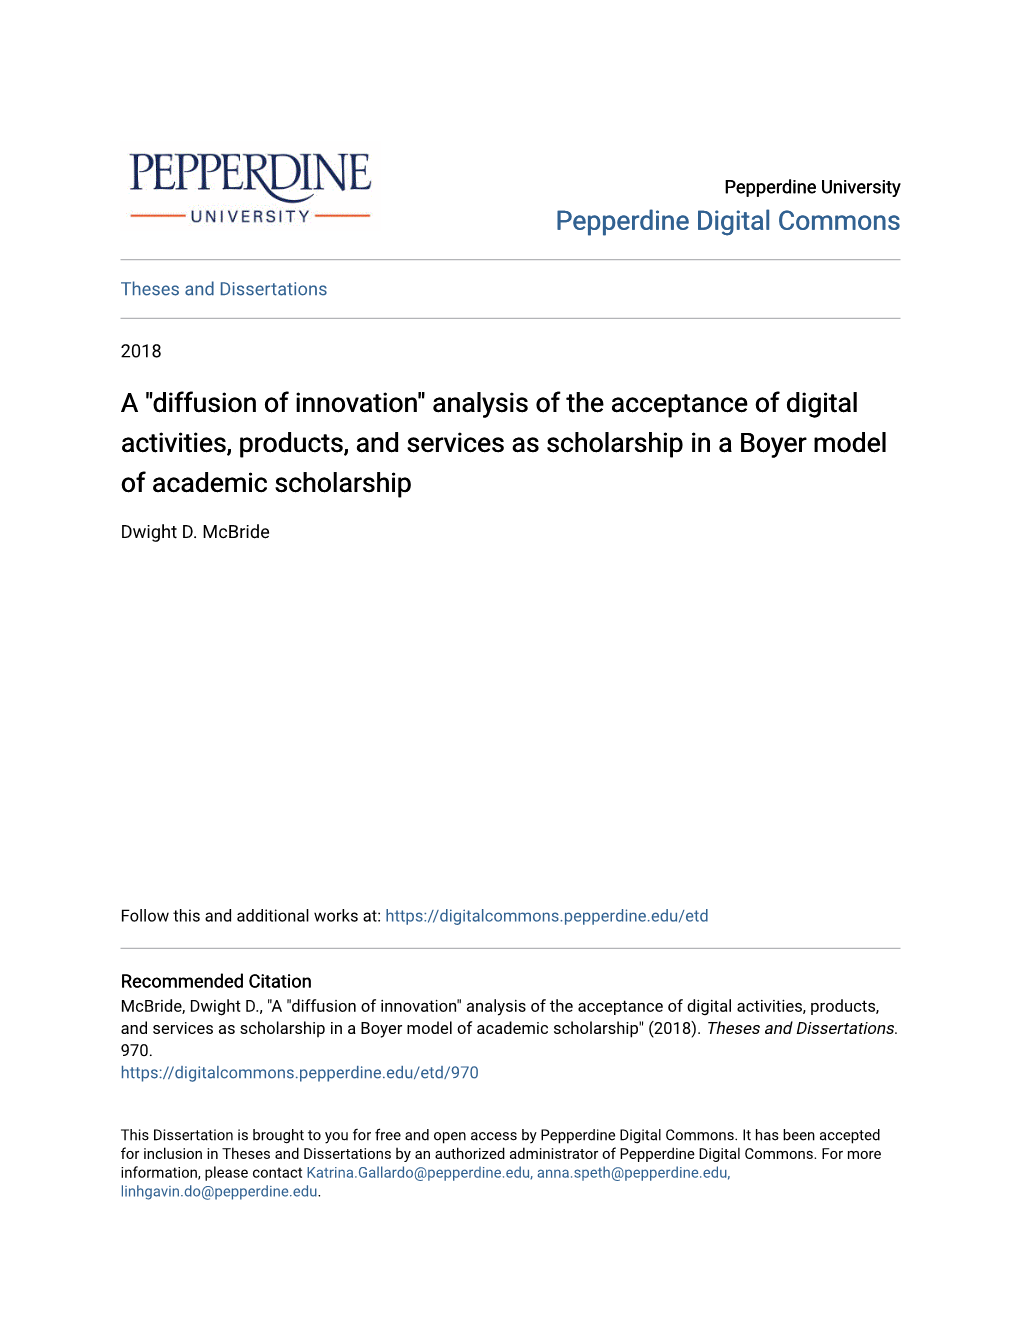 A "Diffusion of Innovation" Analysis of the Acceptance of Digital Activities, Products, and Services As Scholarship in a Boyer Model of Academic Scholarship